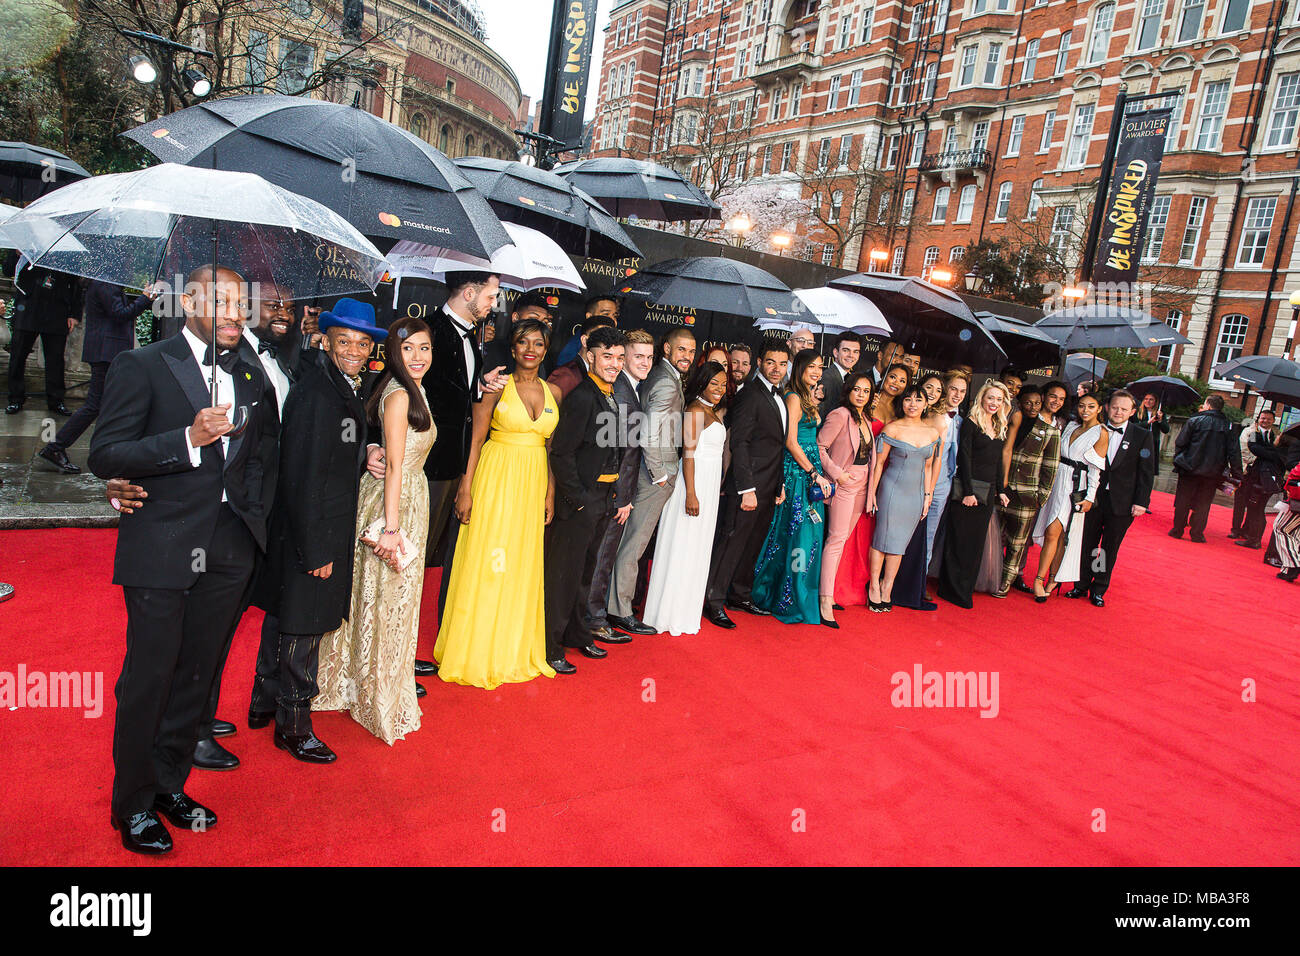 London, UK. 8th April, 2018. The cast of smash hit musical Hamilton pose in the rain on the red carpet at the 2018 Olivier Awards held at the Royal Albert Hall. Hamilton went on the win a record seven Oliviers including Best New Musical. Credit: David Betteridge/Alamy Live News Stock Photo